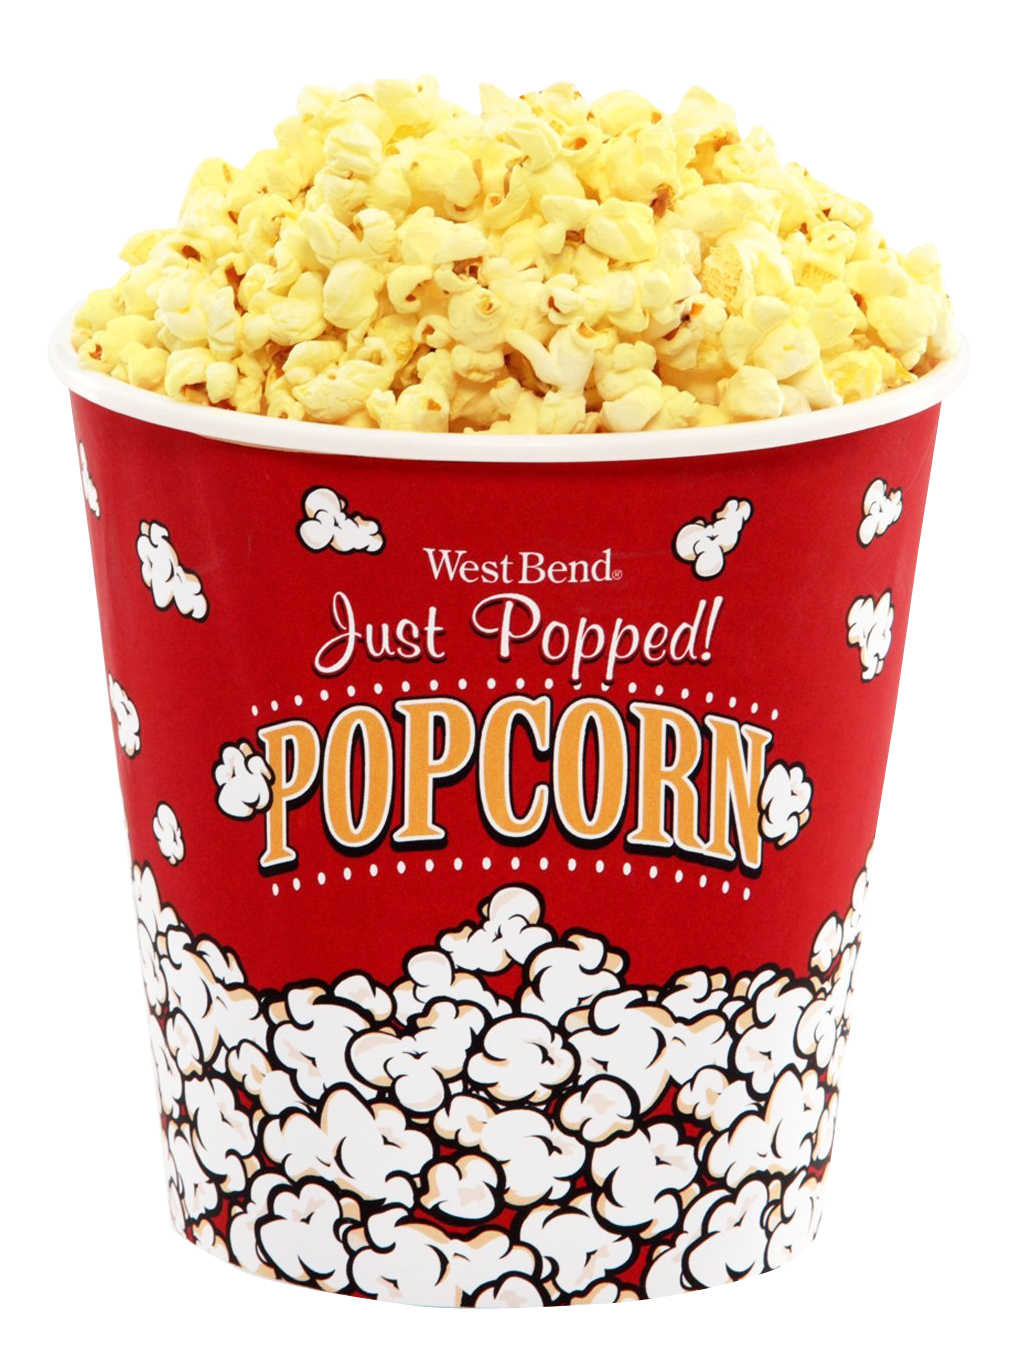 movie clipart food